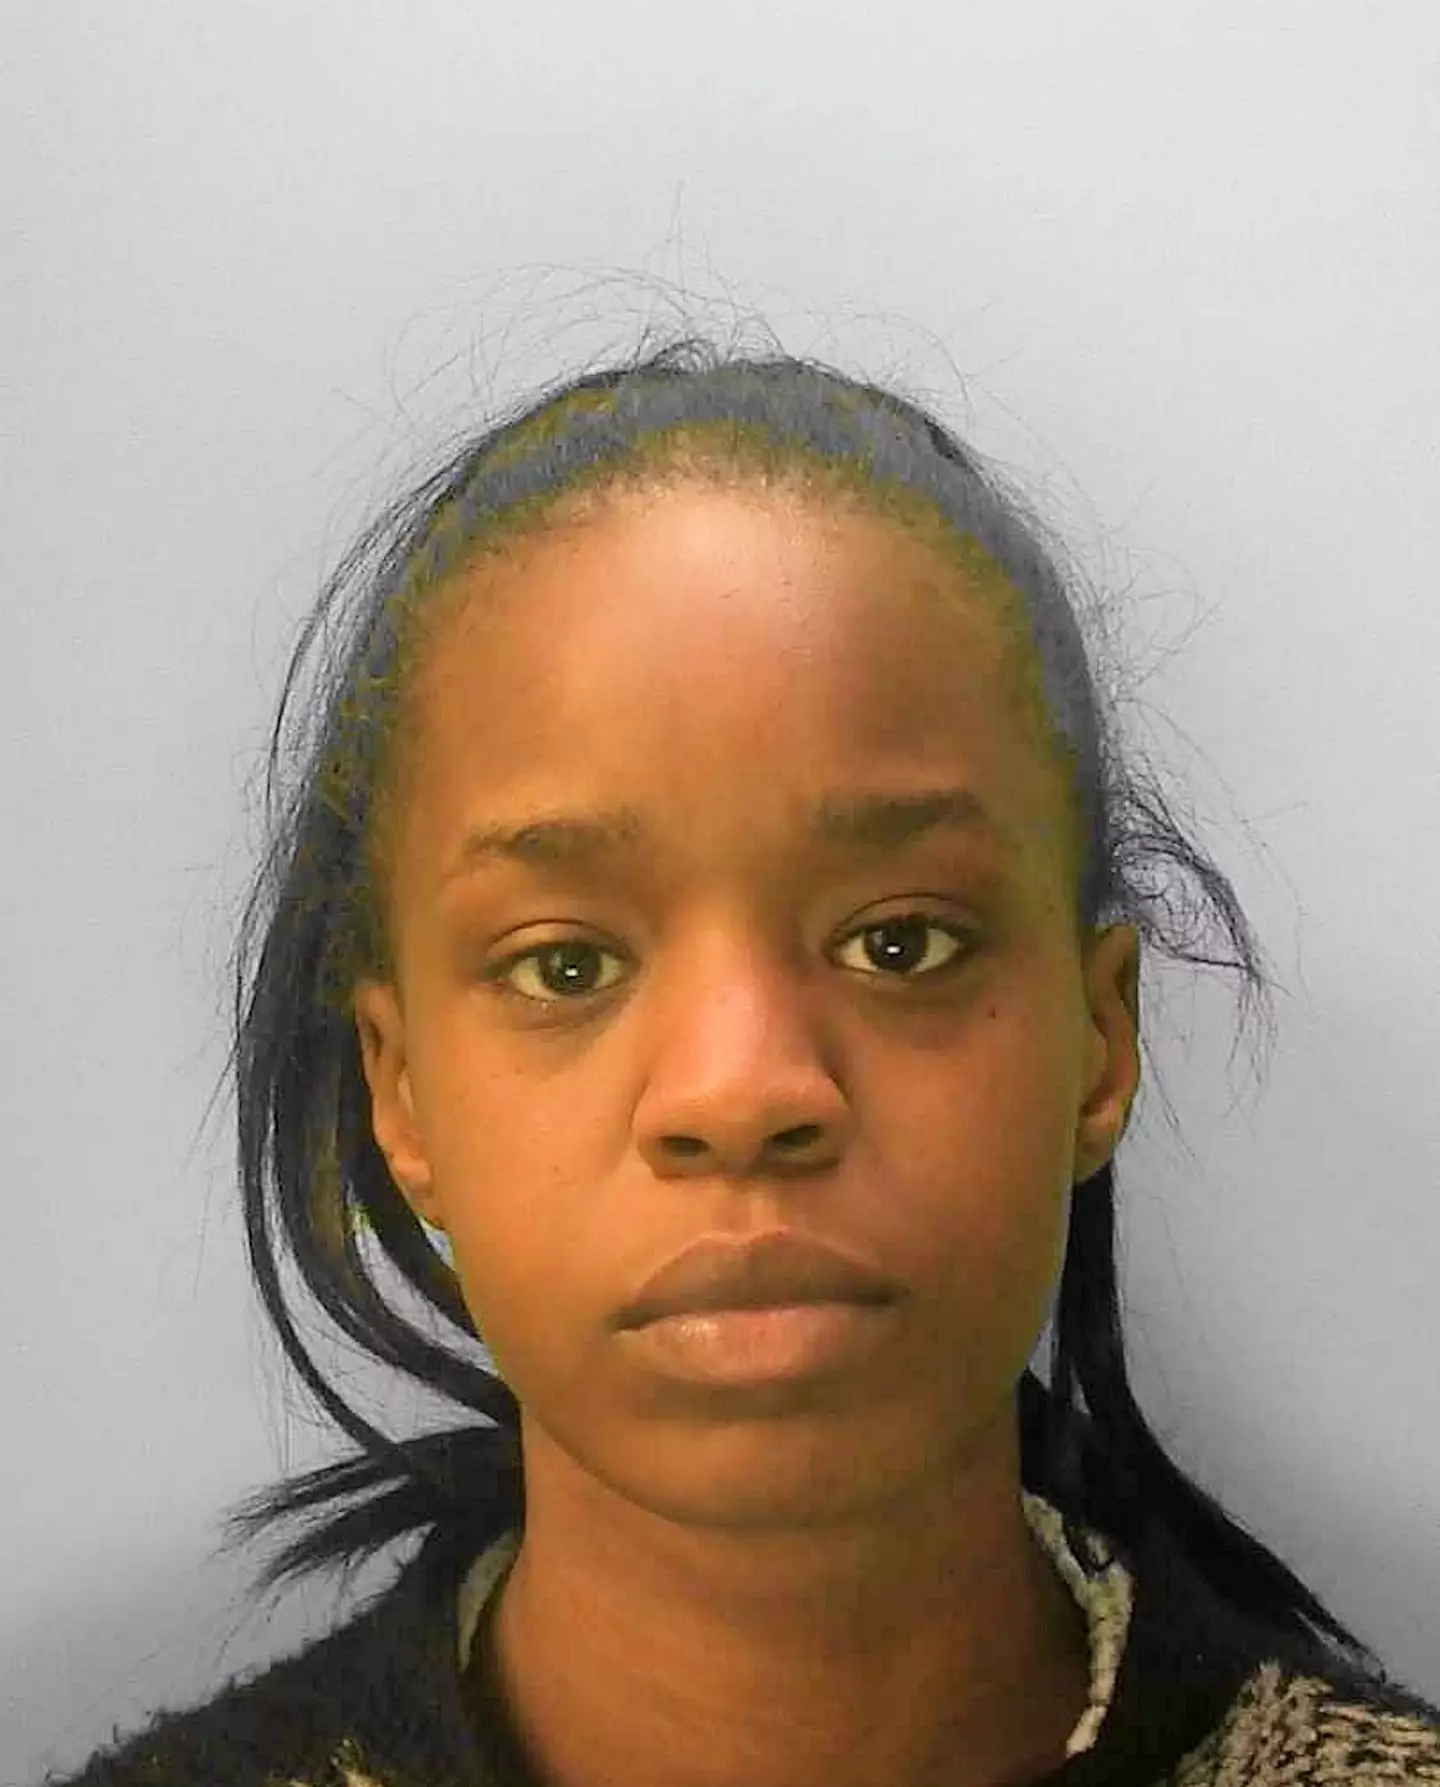 Verphy Kudi was jailed for nine years after leaving her infant daughter home alone for five days while she partied.